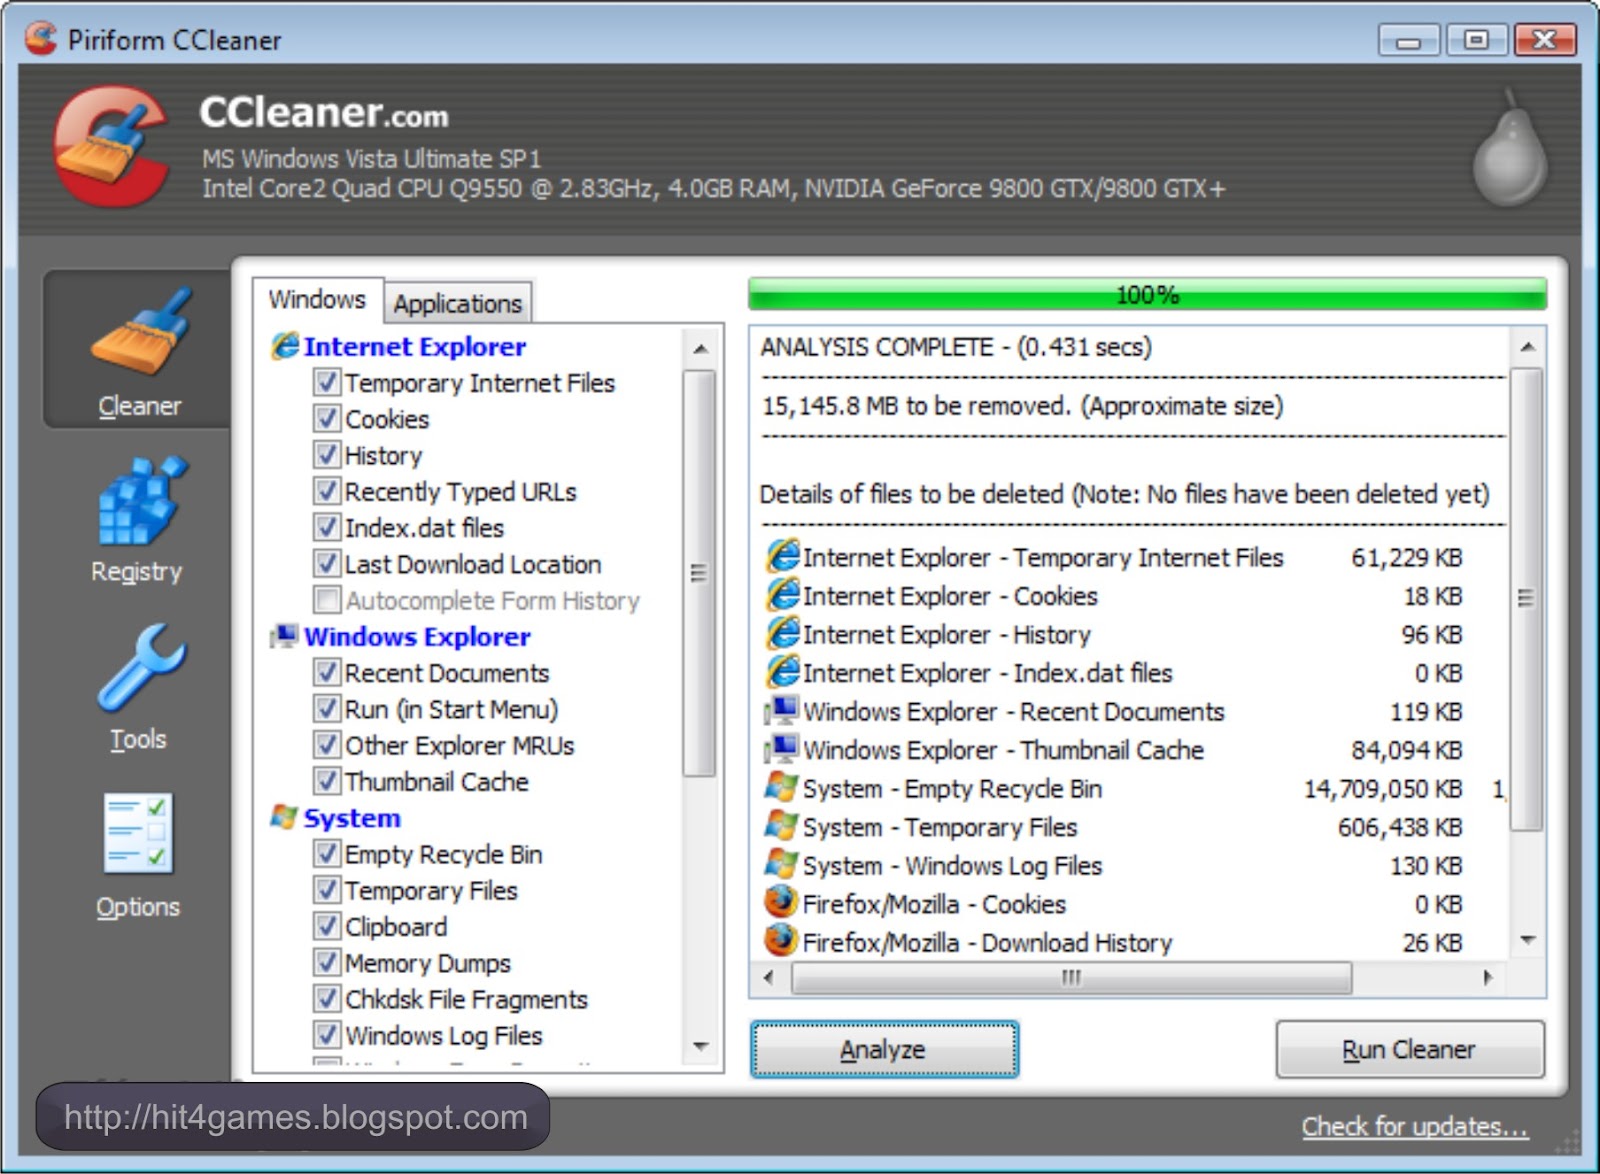 Ccleaner automatically deletes files to iso - Free download how to activate ccleaner professional plus serial key xdv para camara hero